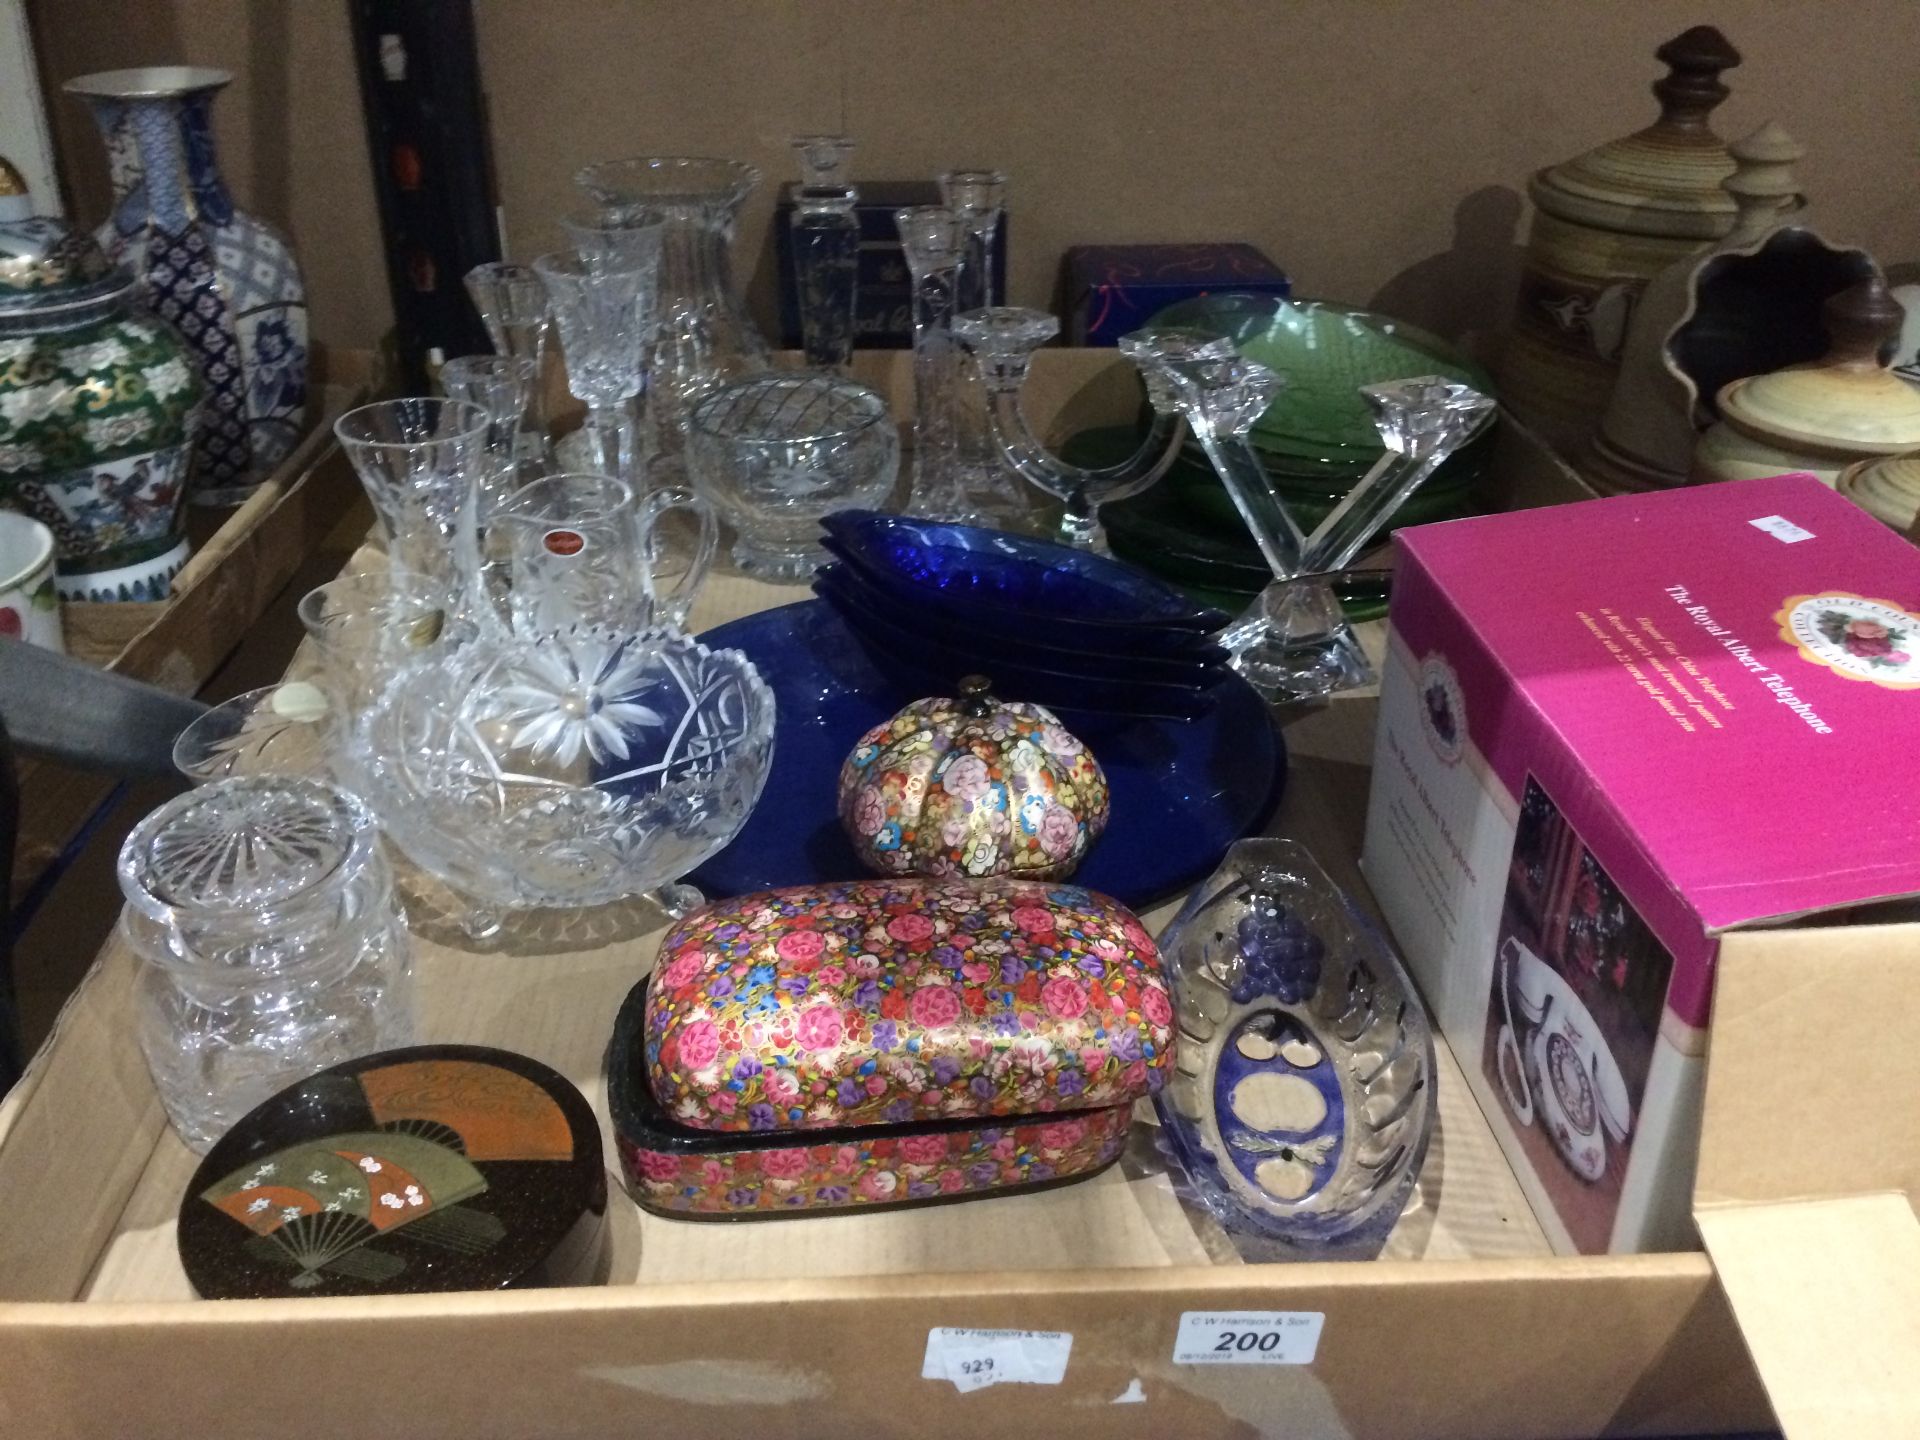 Contents to tray - glassware by Royal Brierley and others,